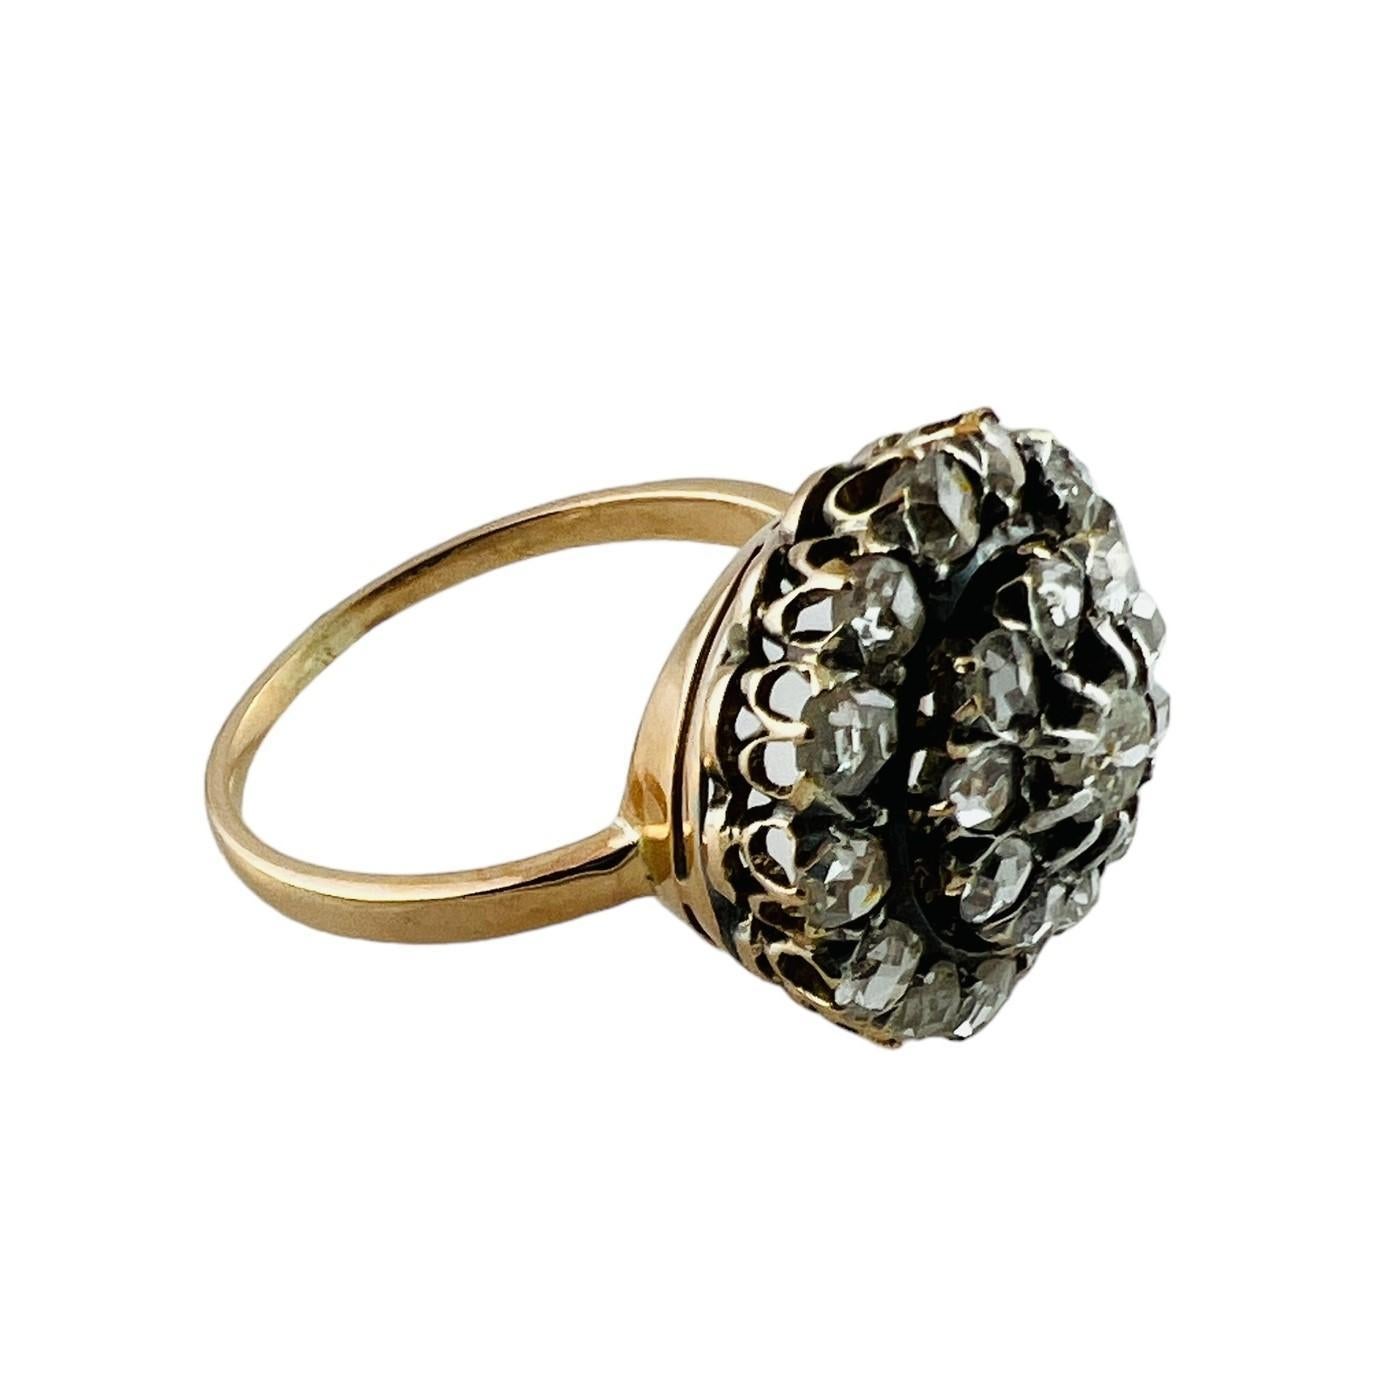 18K Yellow and White Gold Rose Cut Diamond Cluster Ring

This gorgeous diamond ring features two circular rows of 24 rose cut diamonds centered by 1 European cut diamond. 
Diamonds are set in silver which was typical of this time period. 

Center